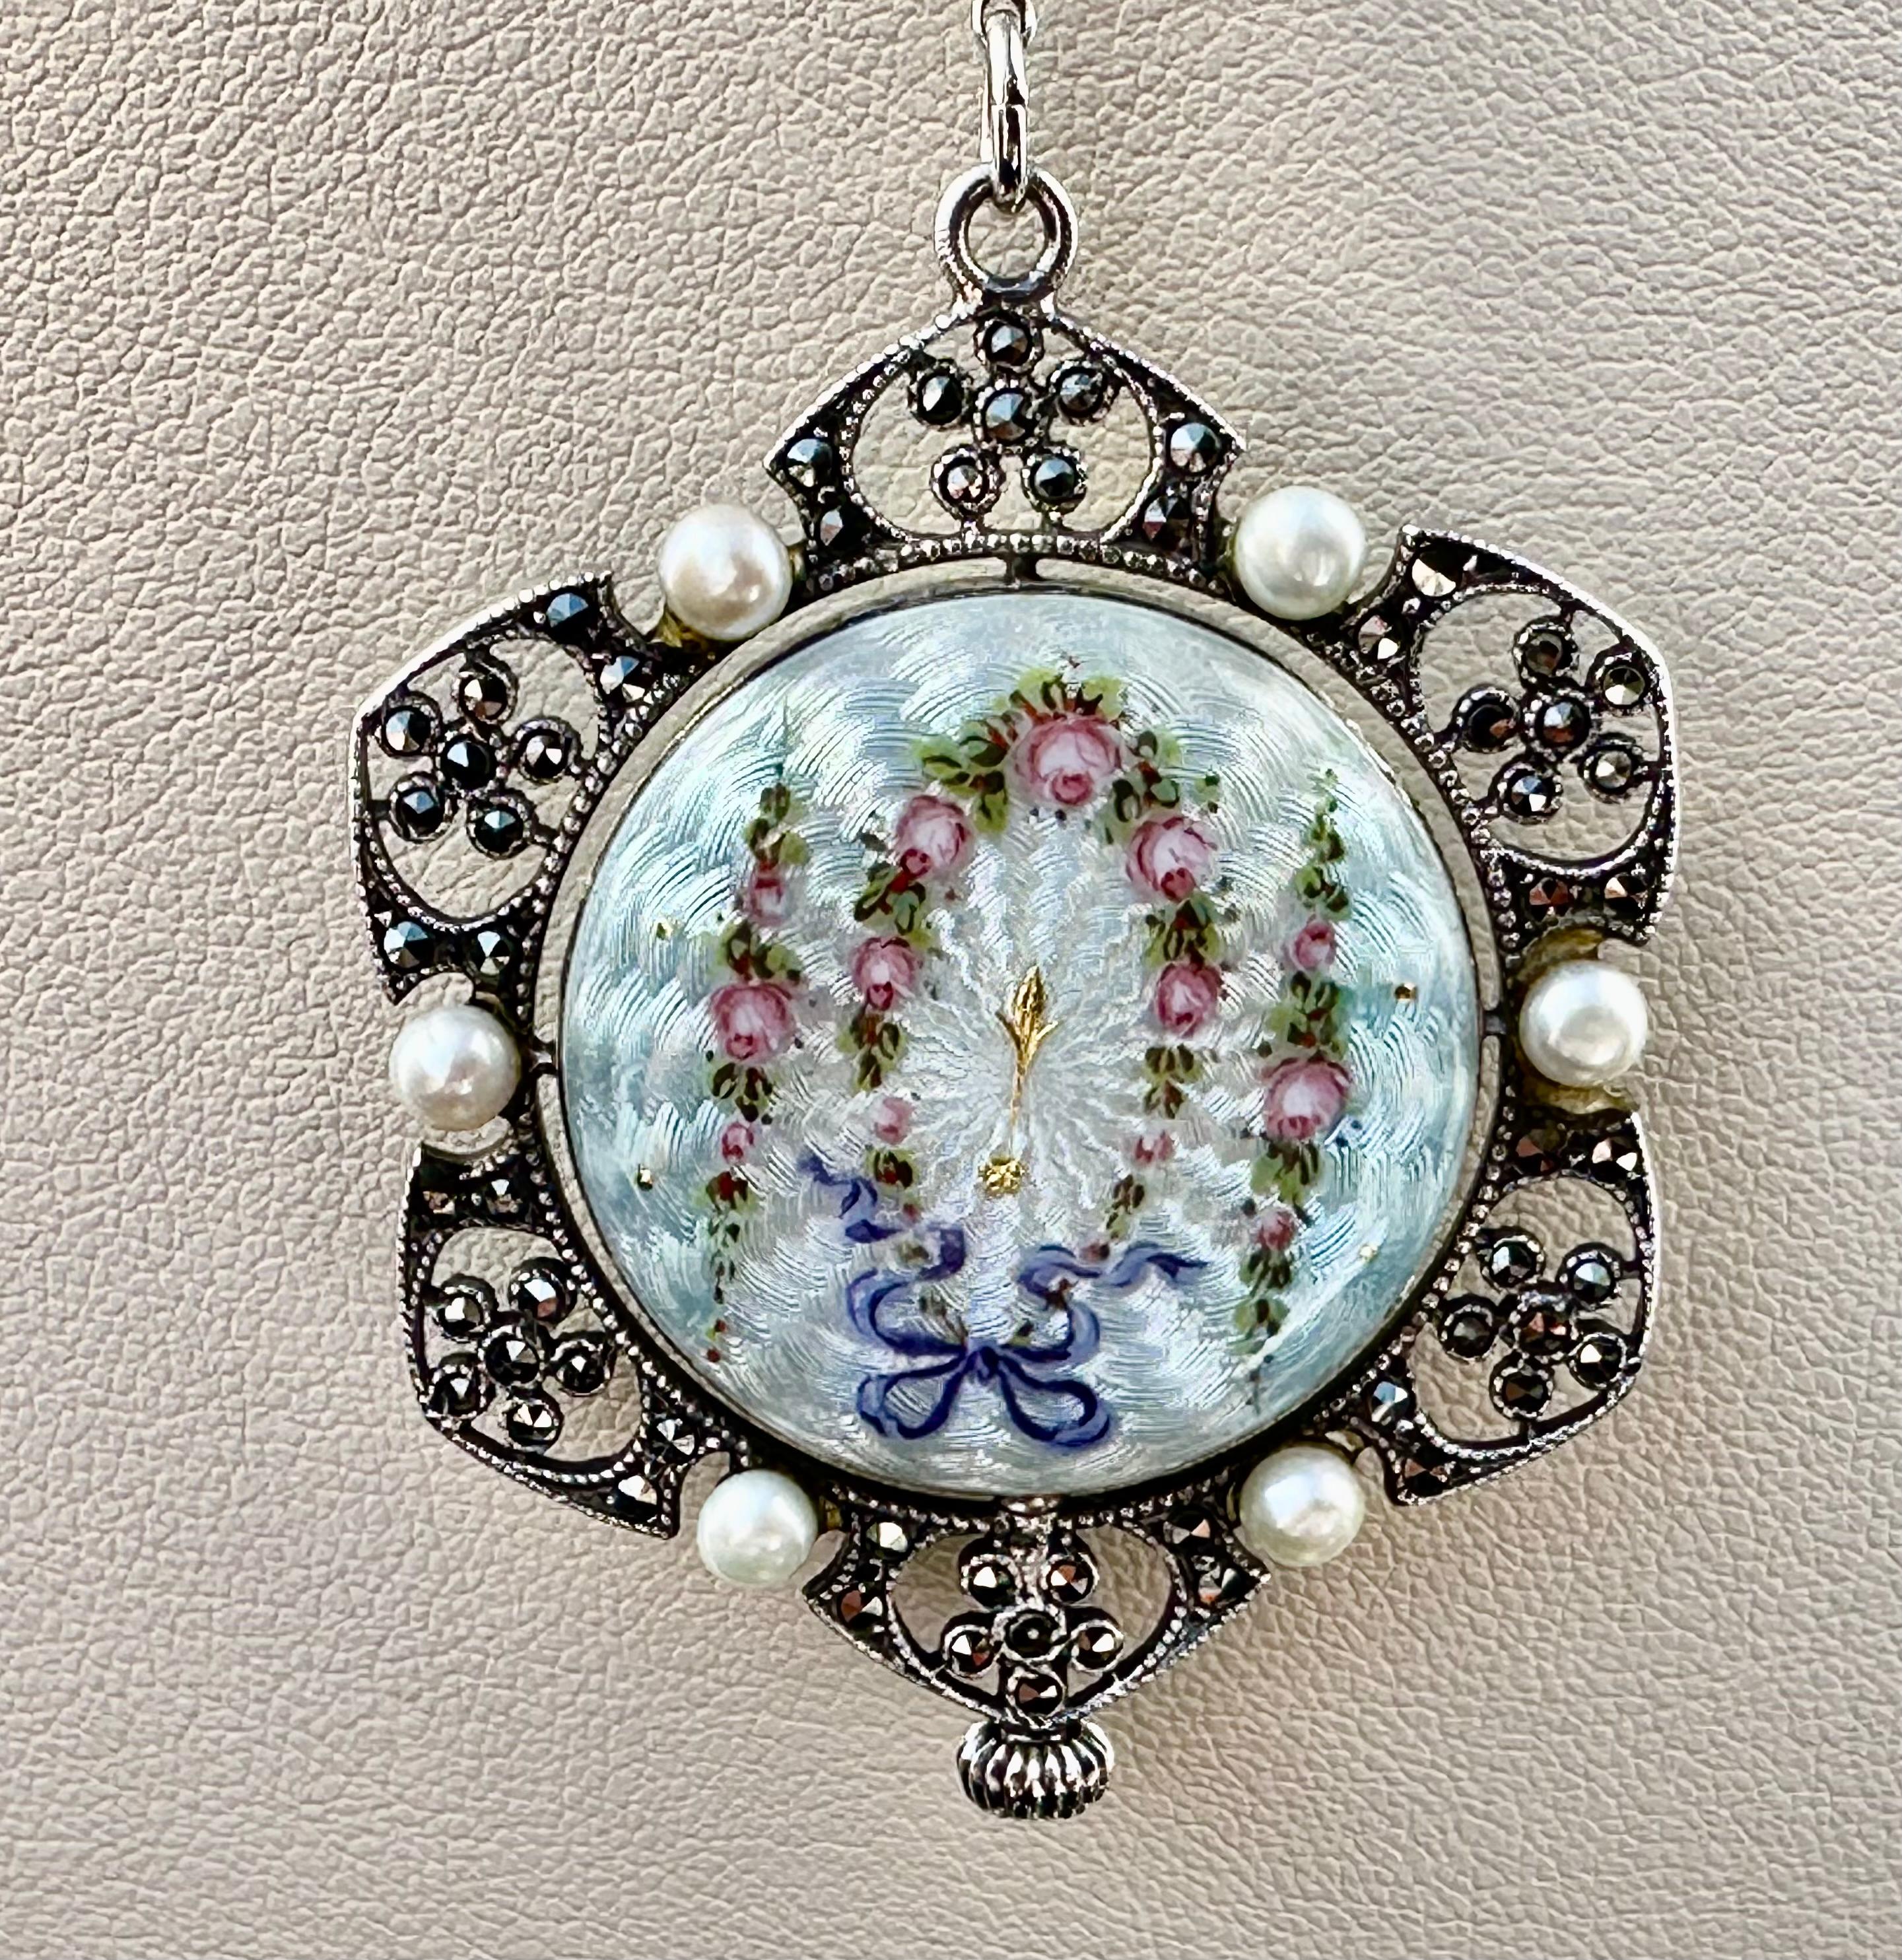 Edwardian Enameled Sterling Silver Marcasite & Natural Pearl Pendant Watch In Excellent Condition For Sale In Laguna Beach, CA